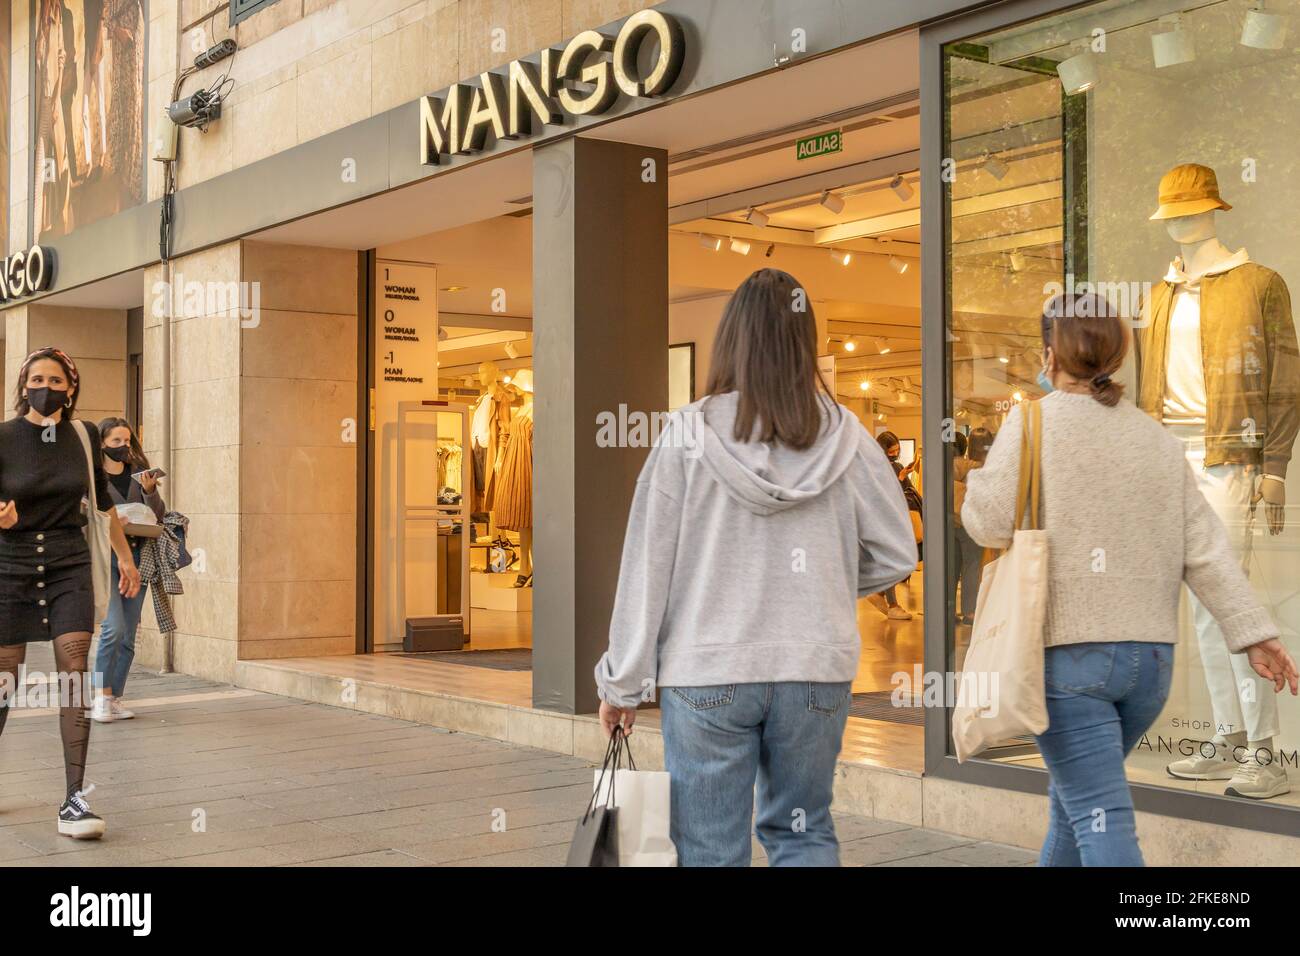 Palma de Mallorca, Spain; april 23 2021: Shop of a clothing and accessories store belonging to the multinational Mango, with people wearing fac Stock Photo - Alamy